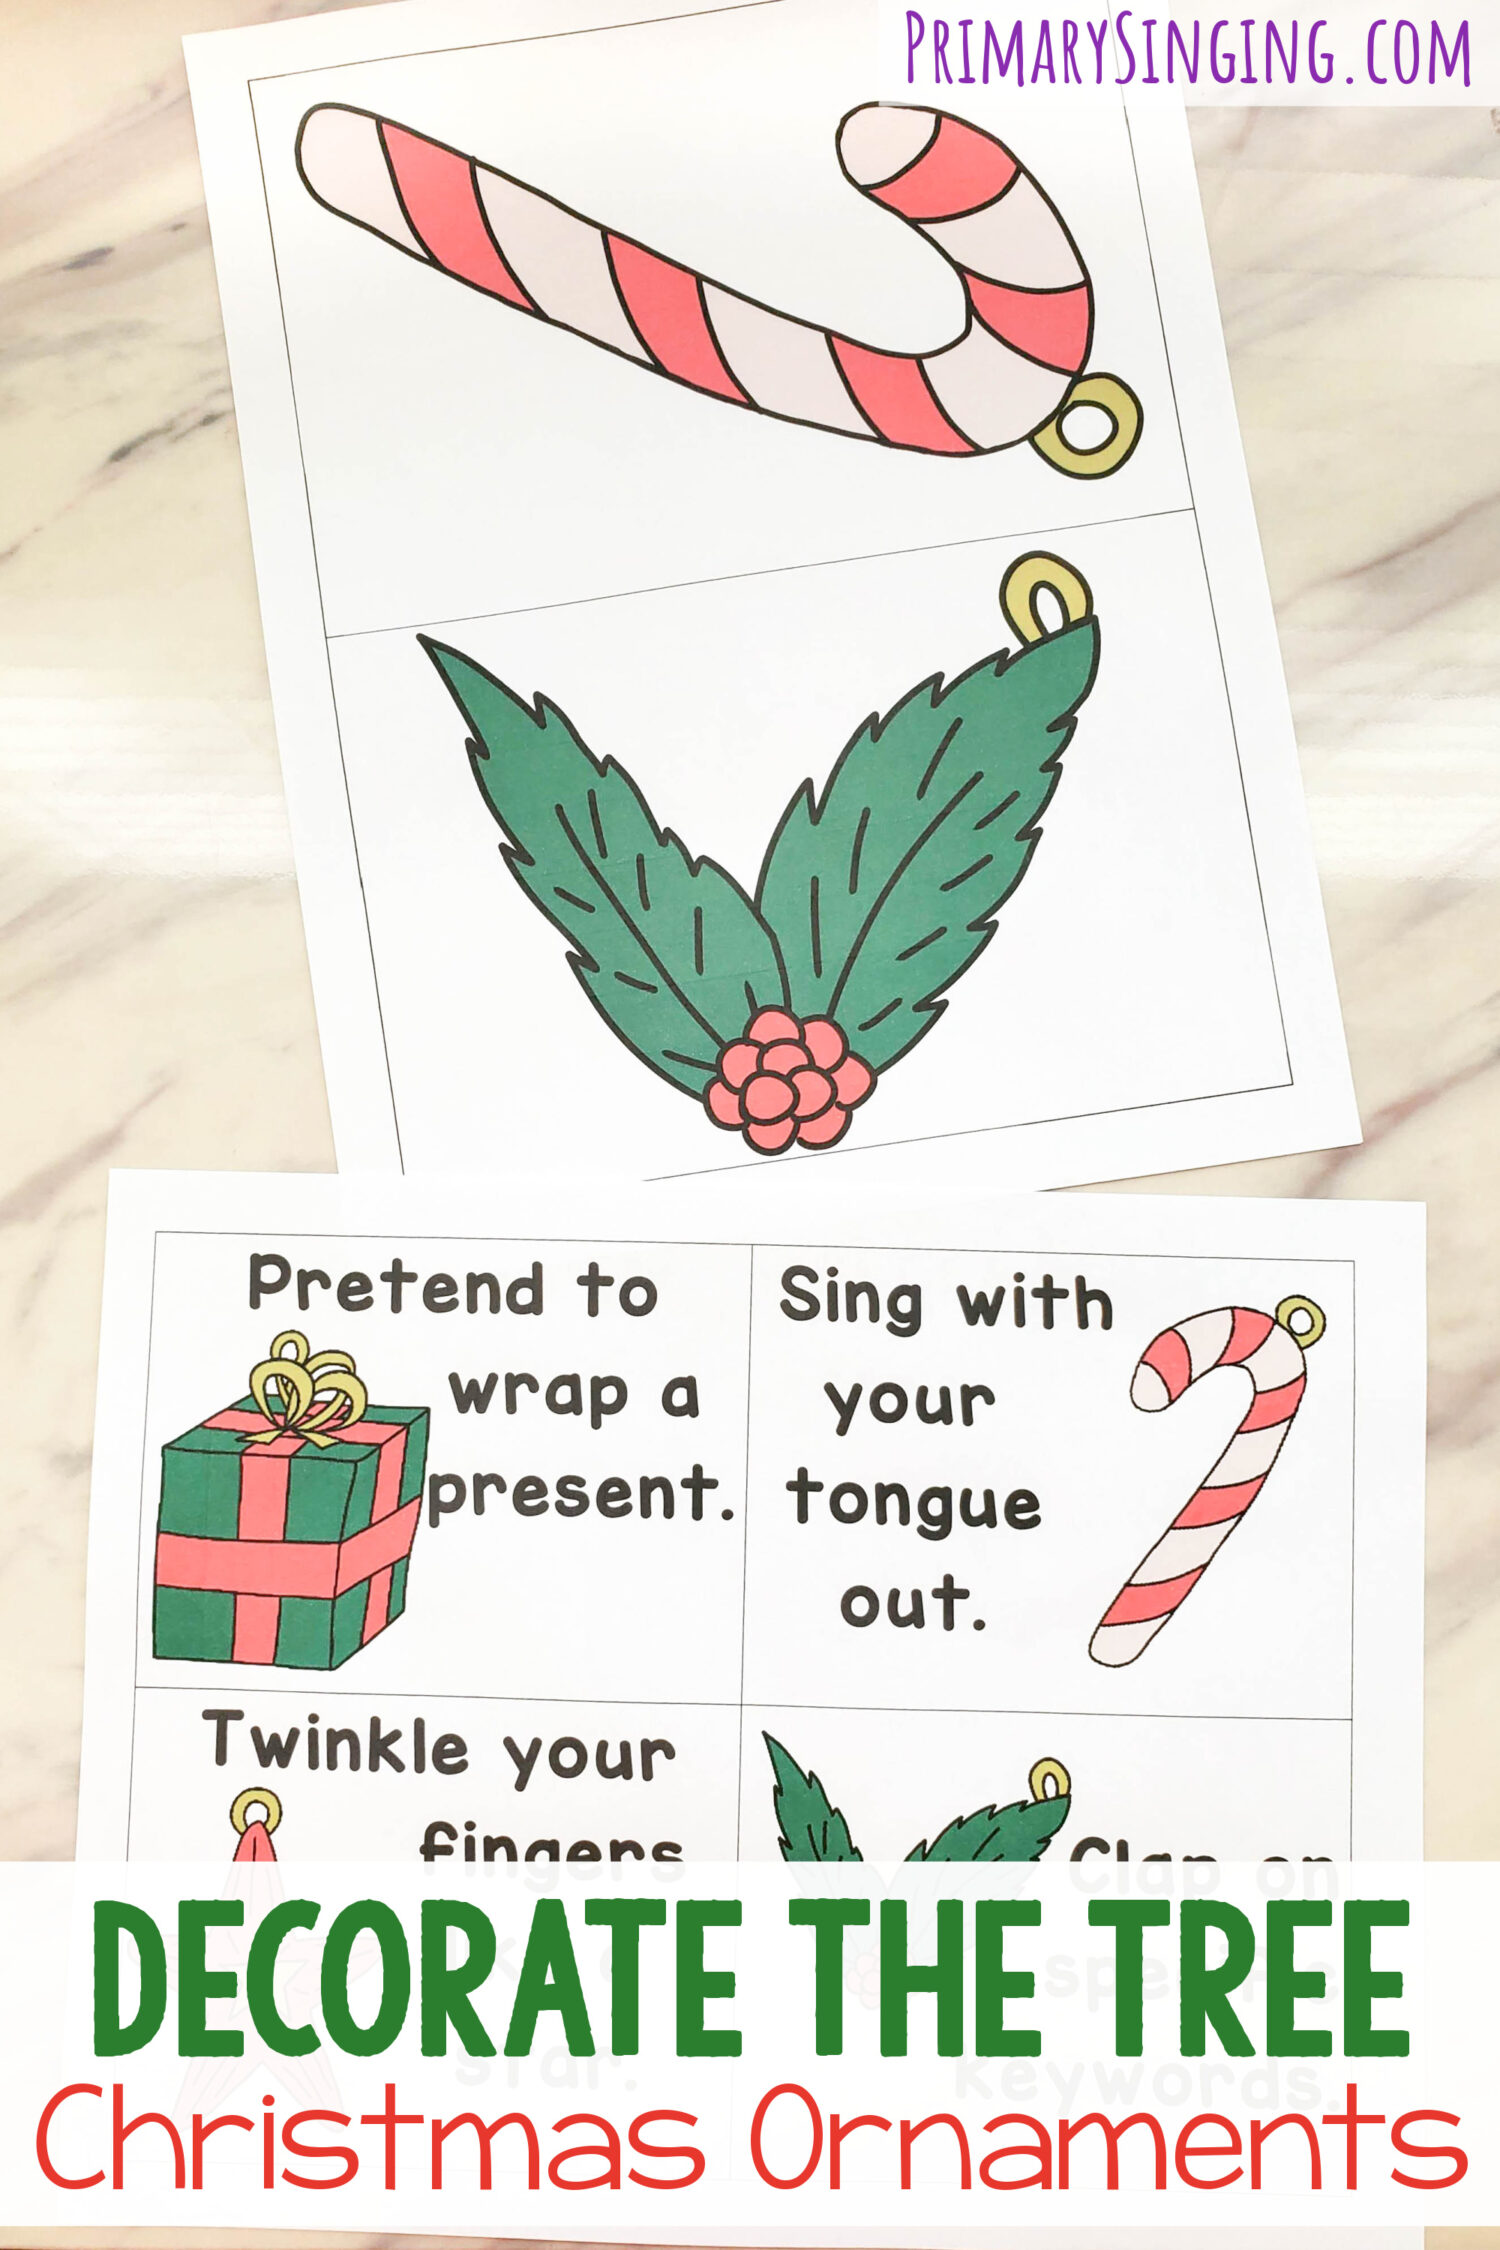 Decorate the Tree Christmas Ornaments fun singing time game and activity for LDS Primary music leaders. Let the kids pick out an ornament and add it to a a Christmas tree and sing the coordinating song or way to sing activity.